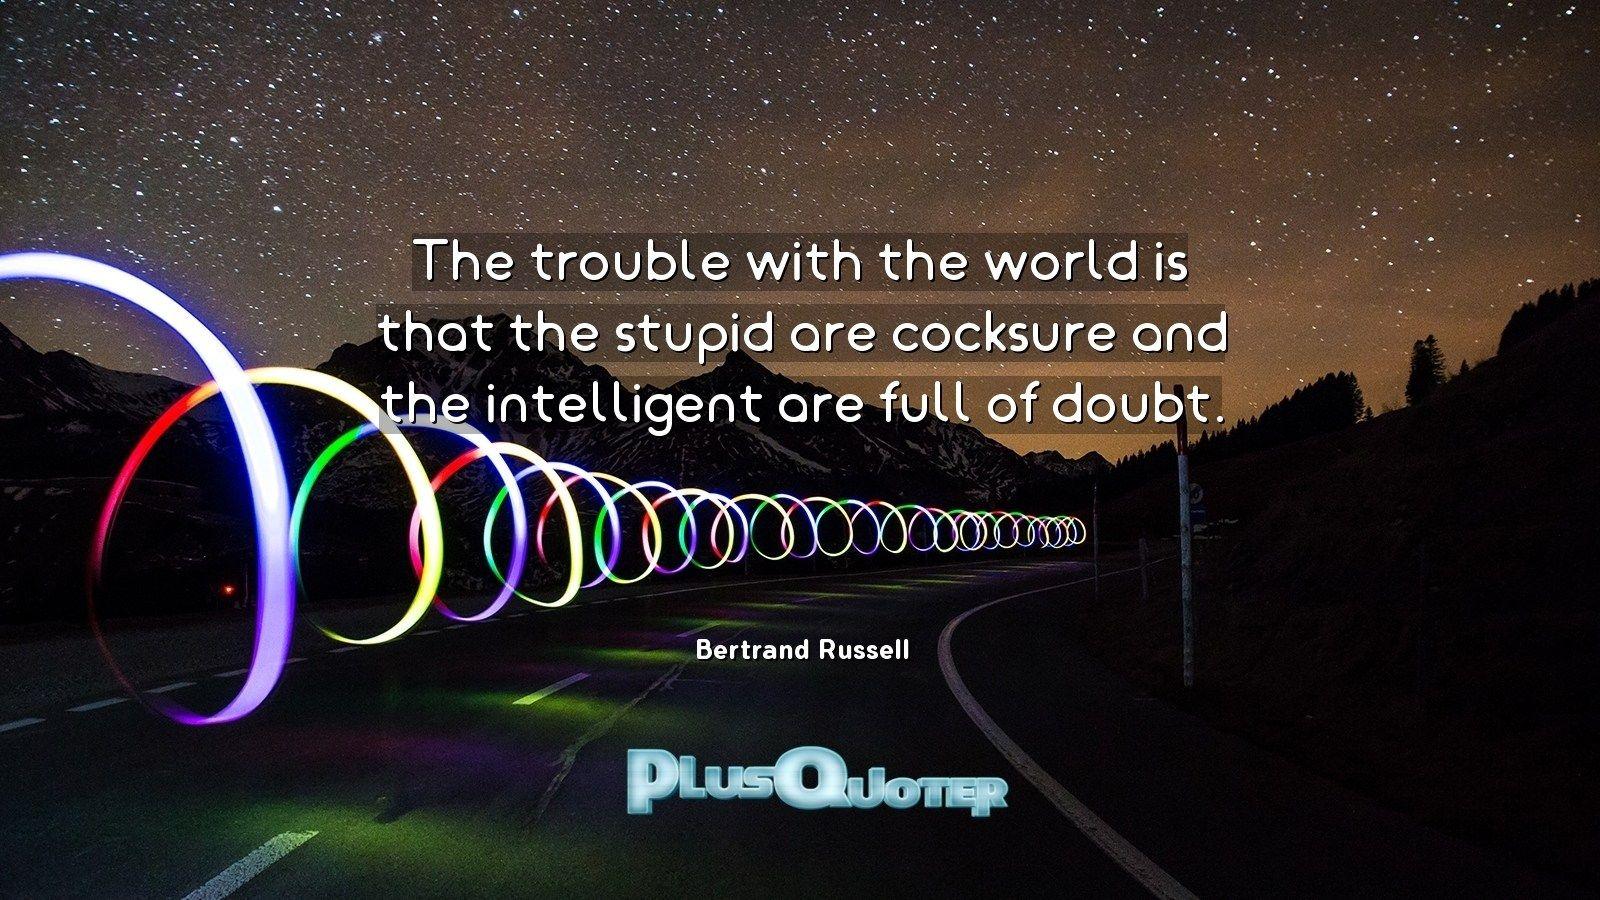 The trouble with the world is that the stupid are cocksure and